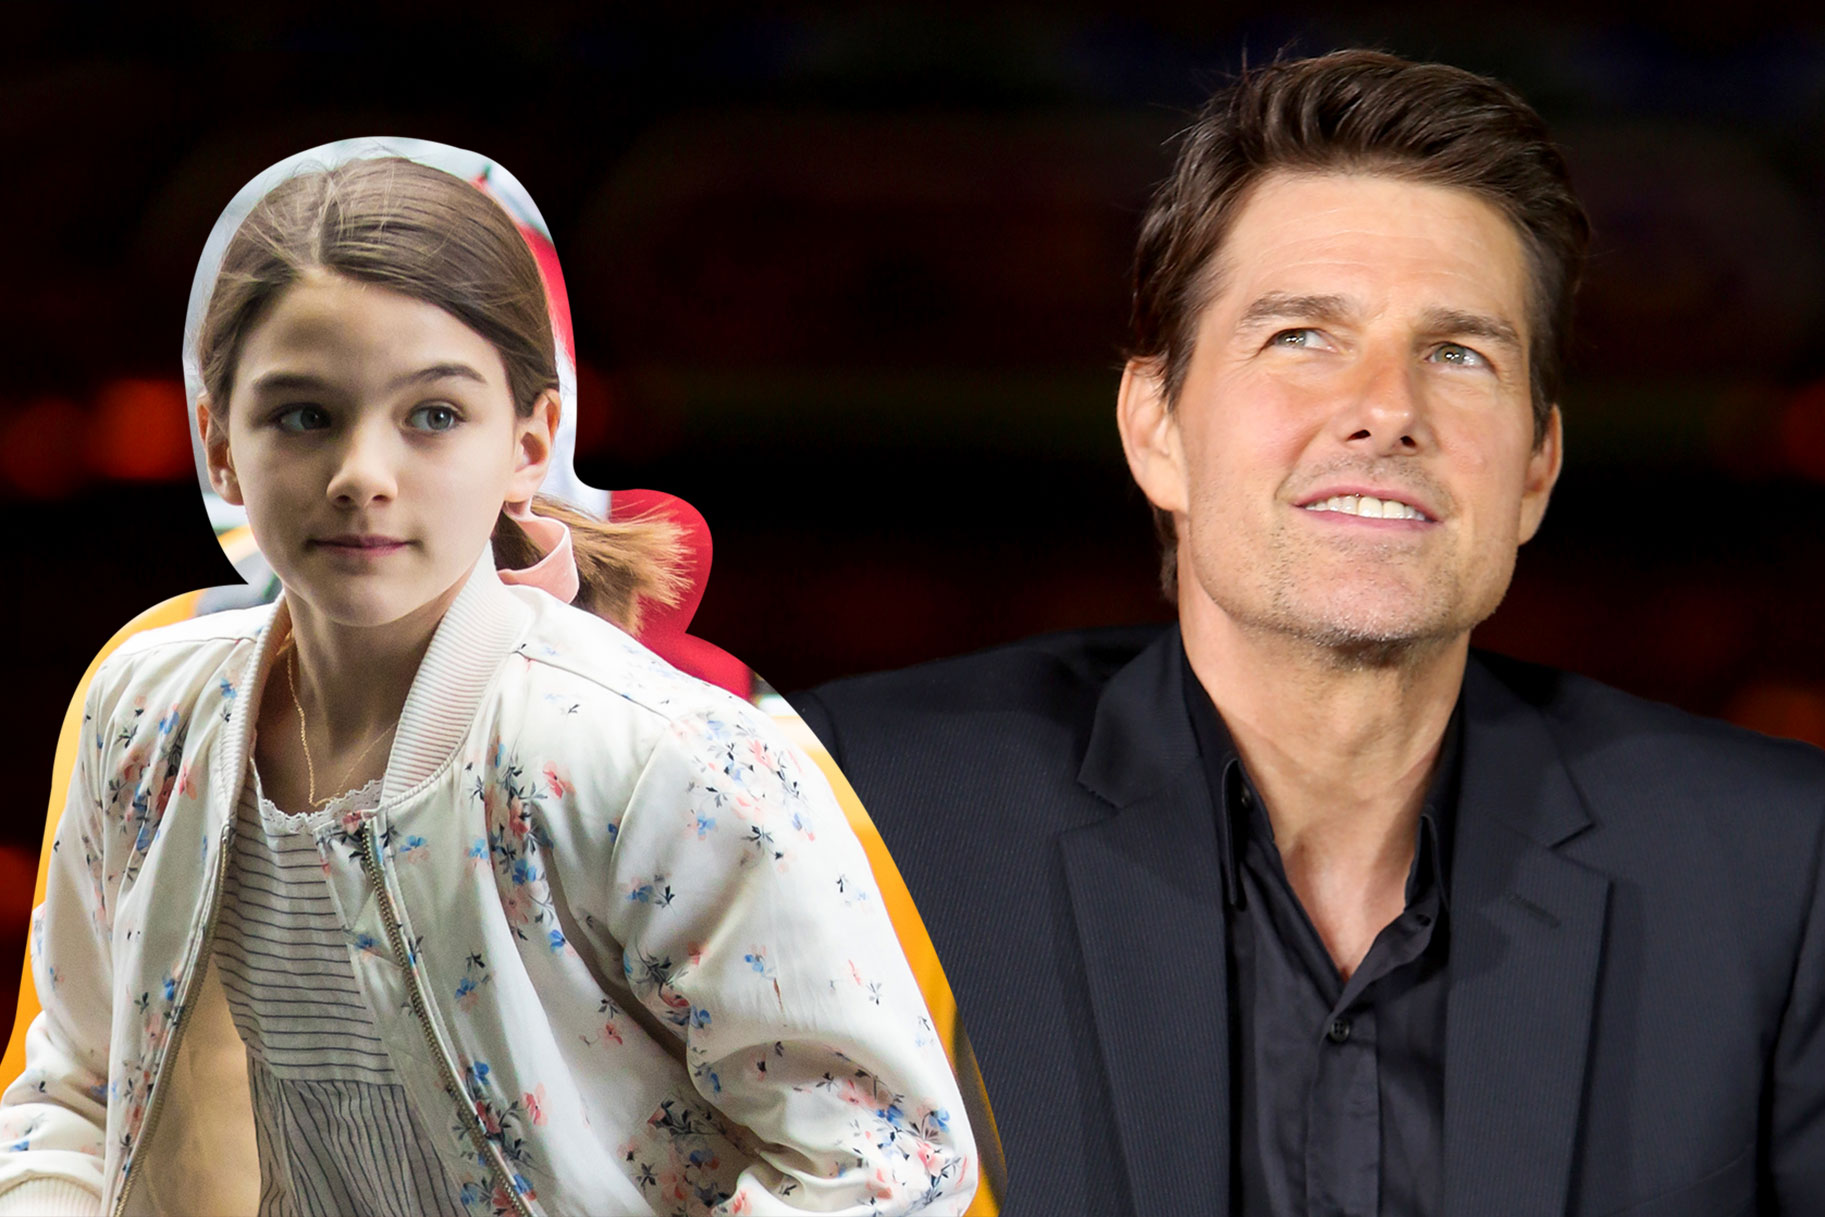 why did tom cruise not see suri